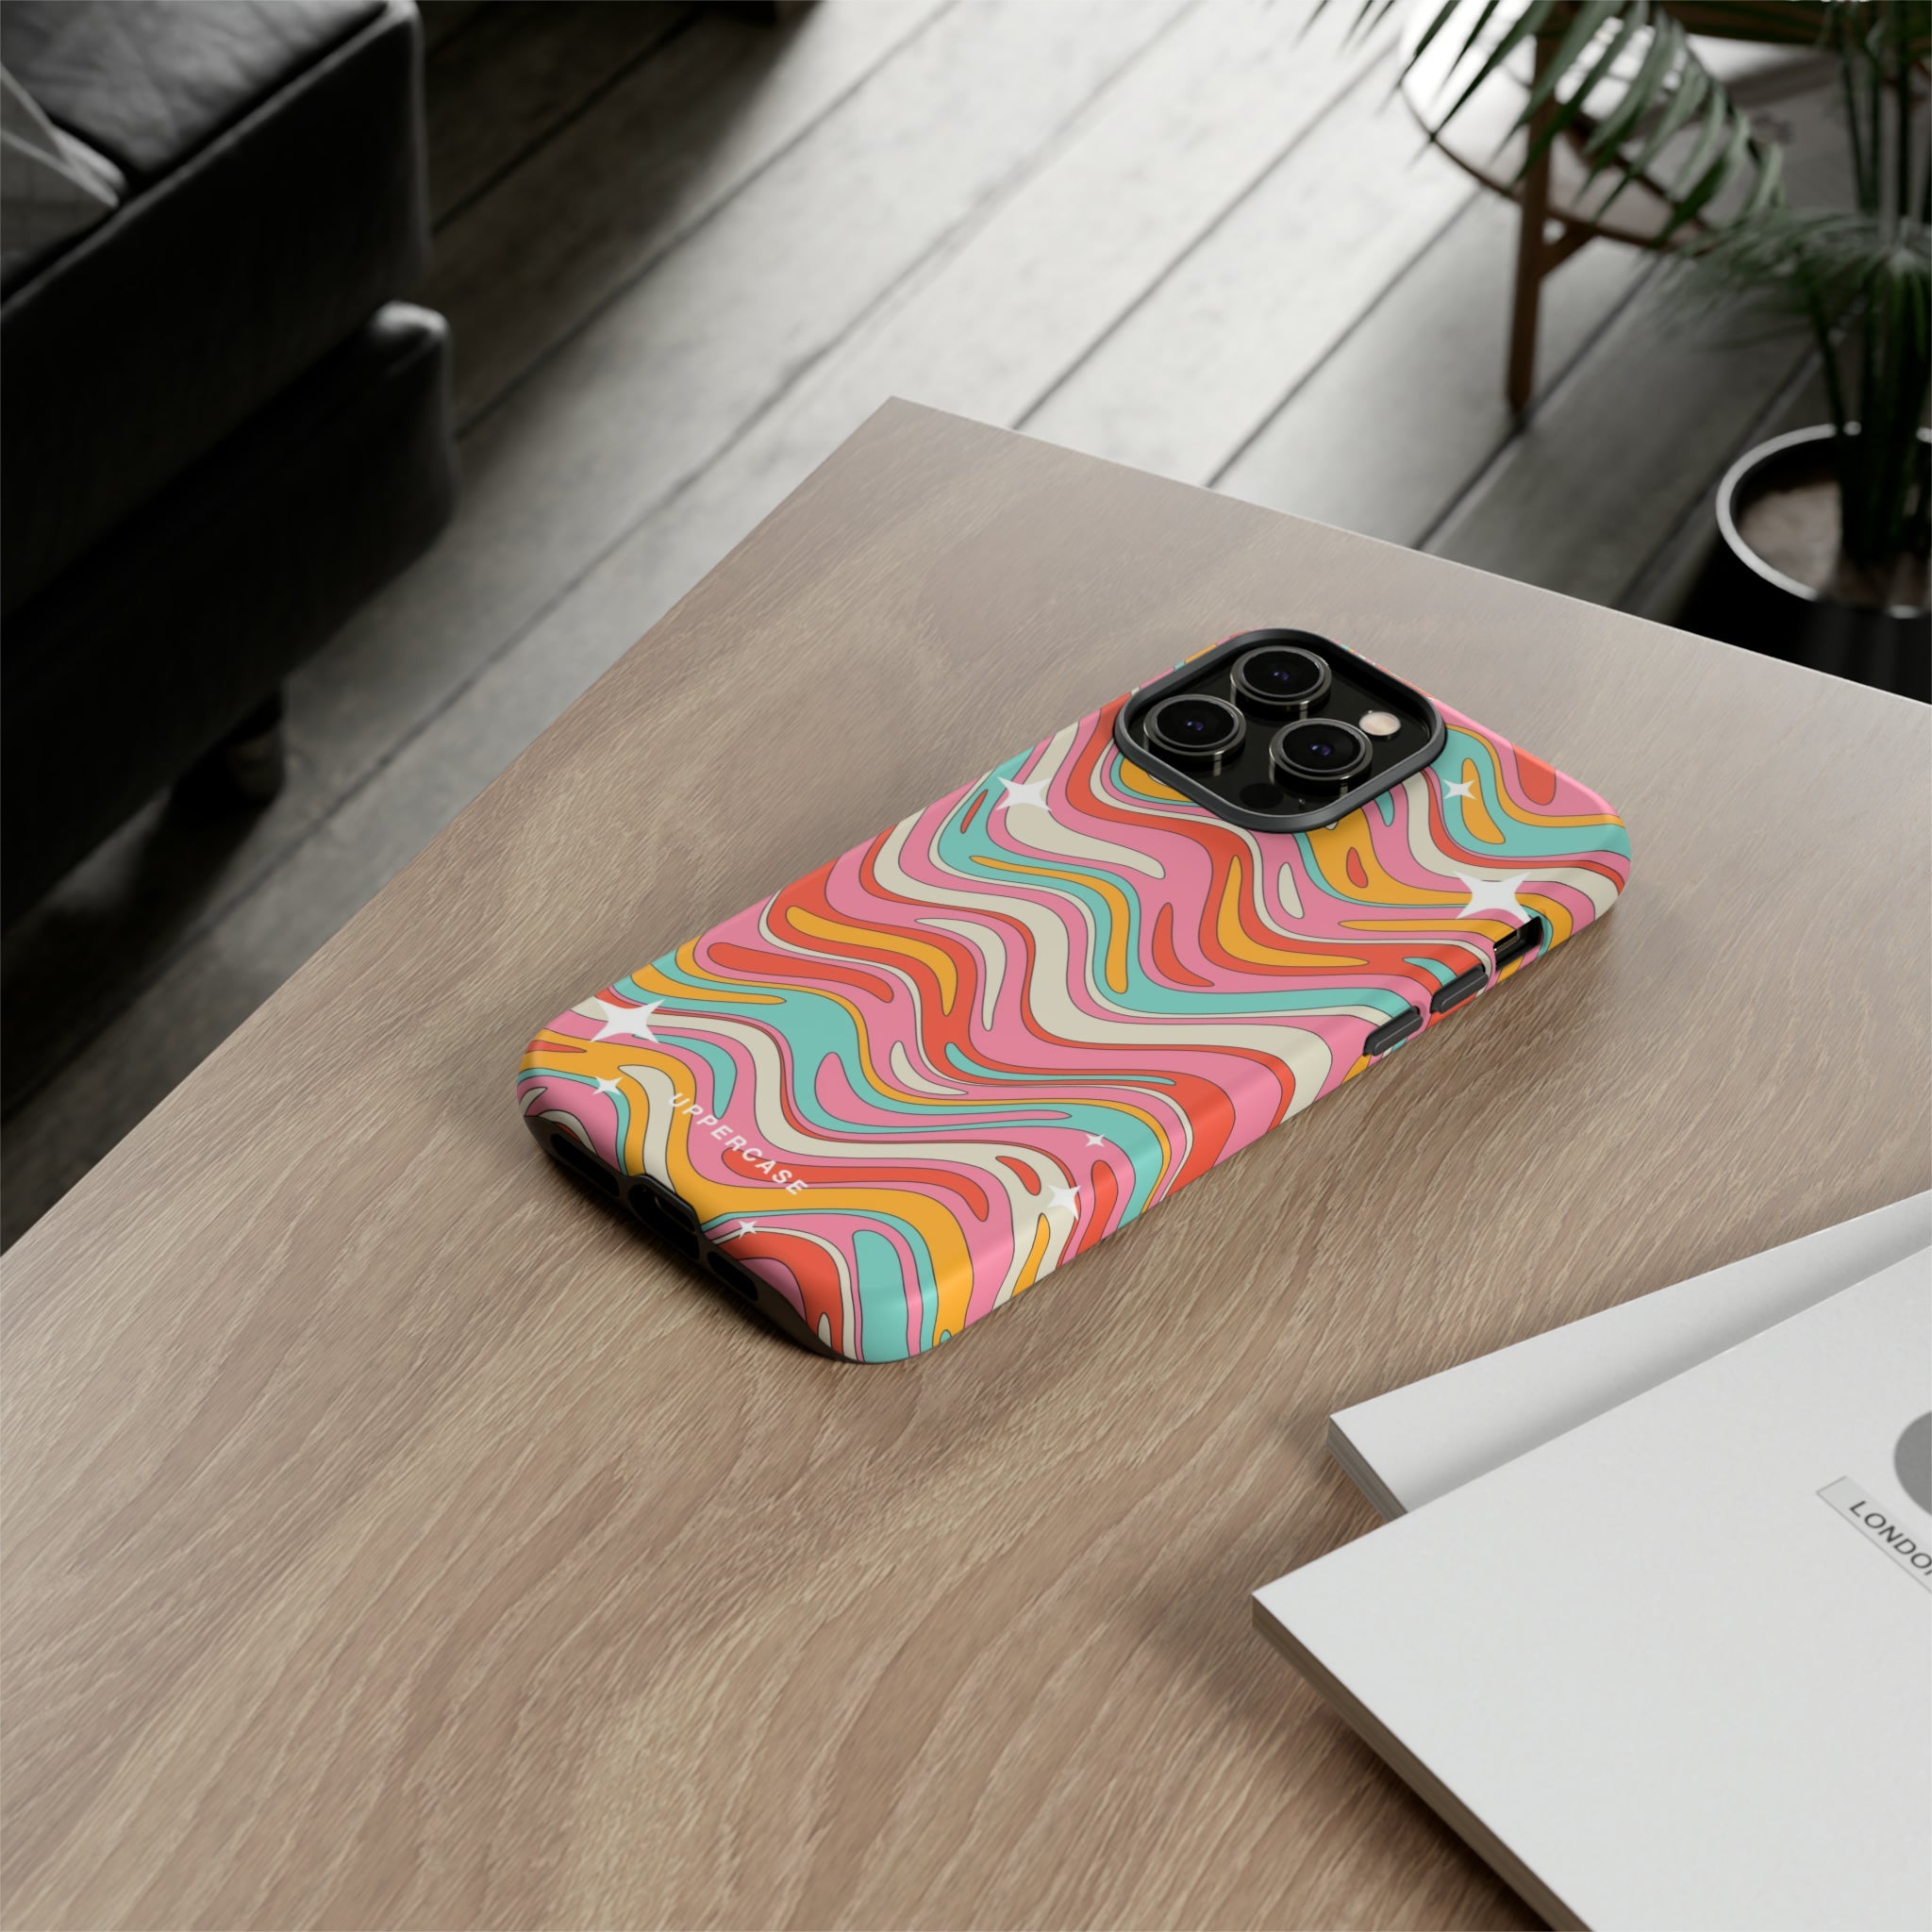 Stay Groovy - Personalised Strong Case